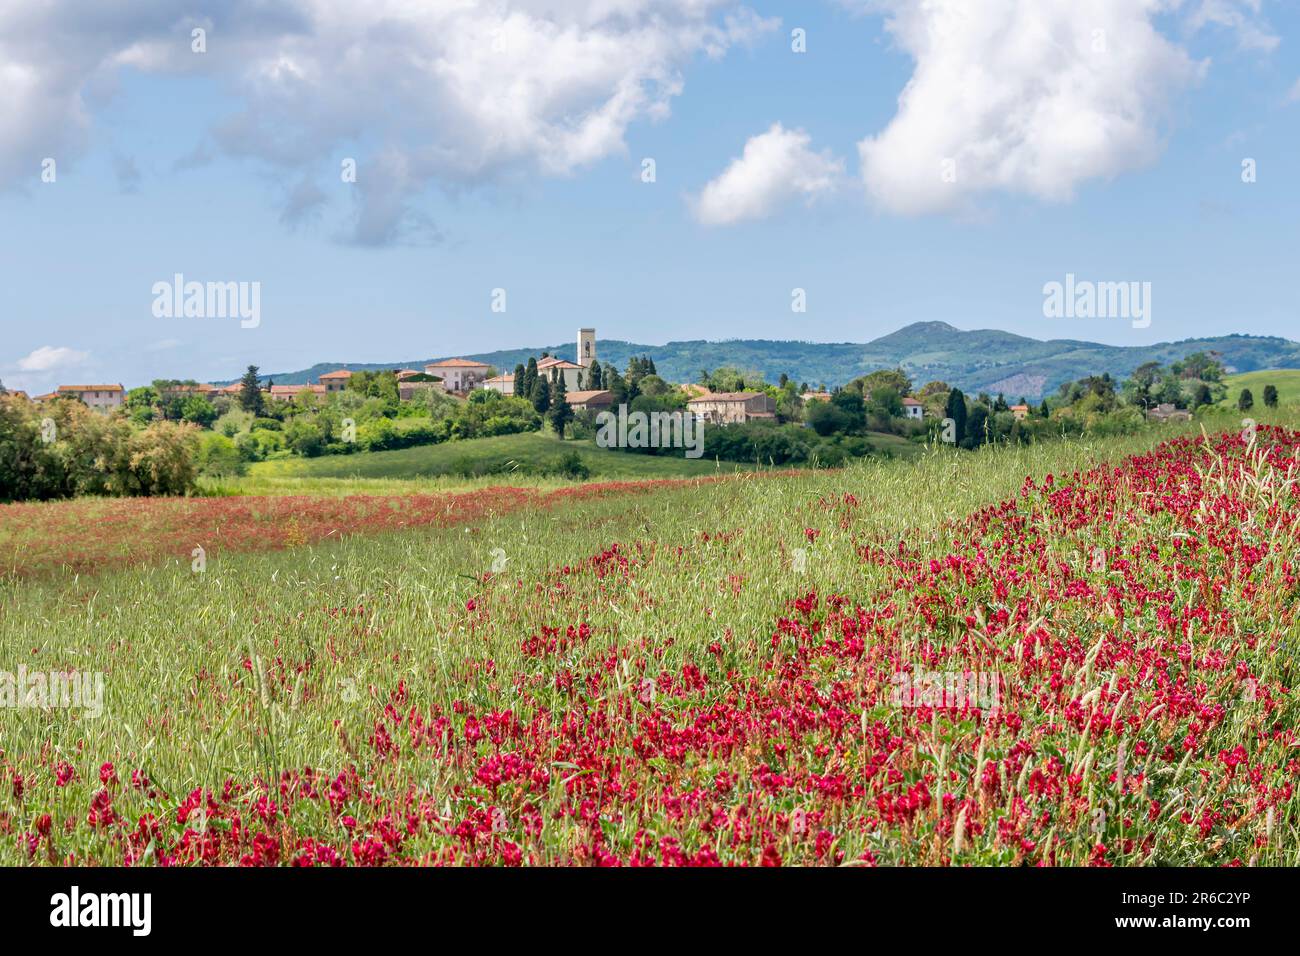 A field colored red by French honeysuckle flowers, with Orciano Pisano in the background, Tuscany, Italy Stock Photo